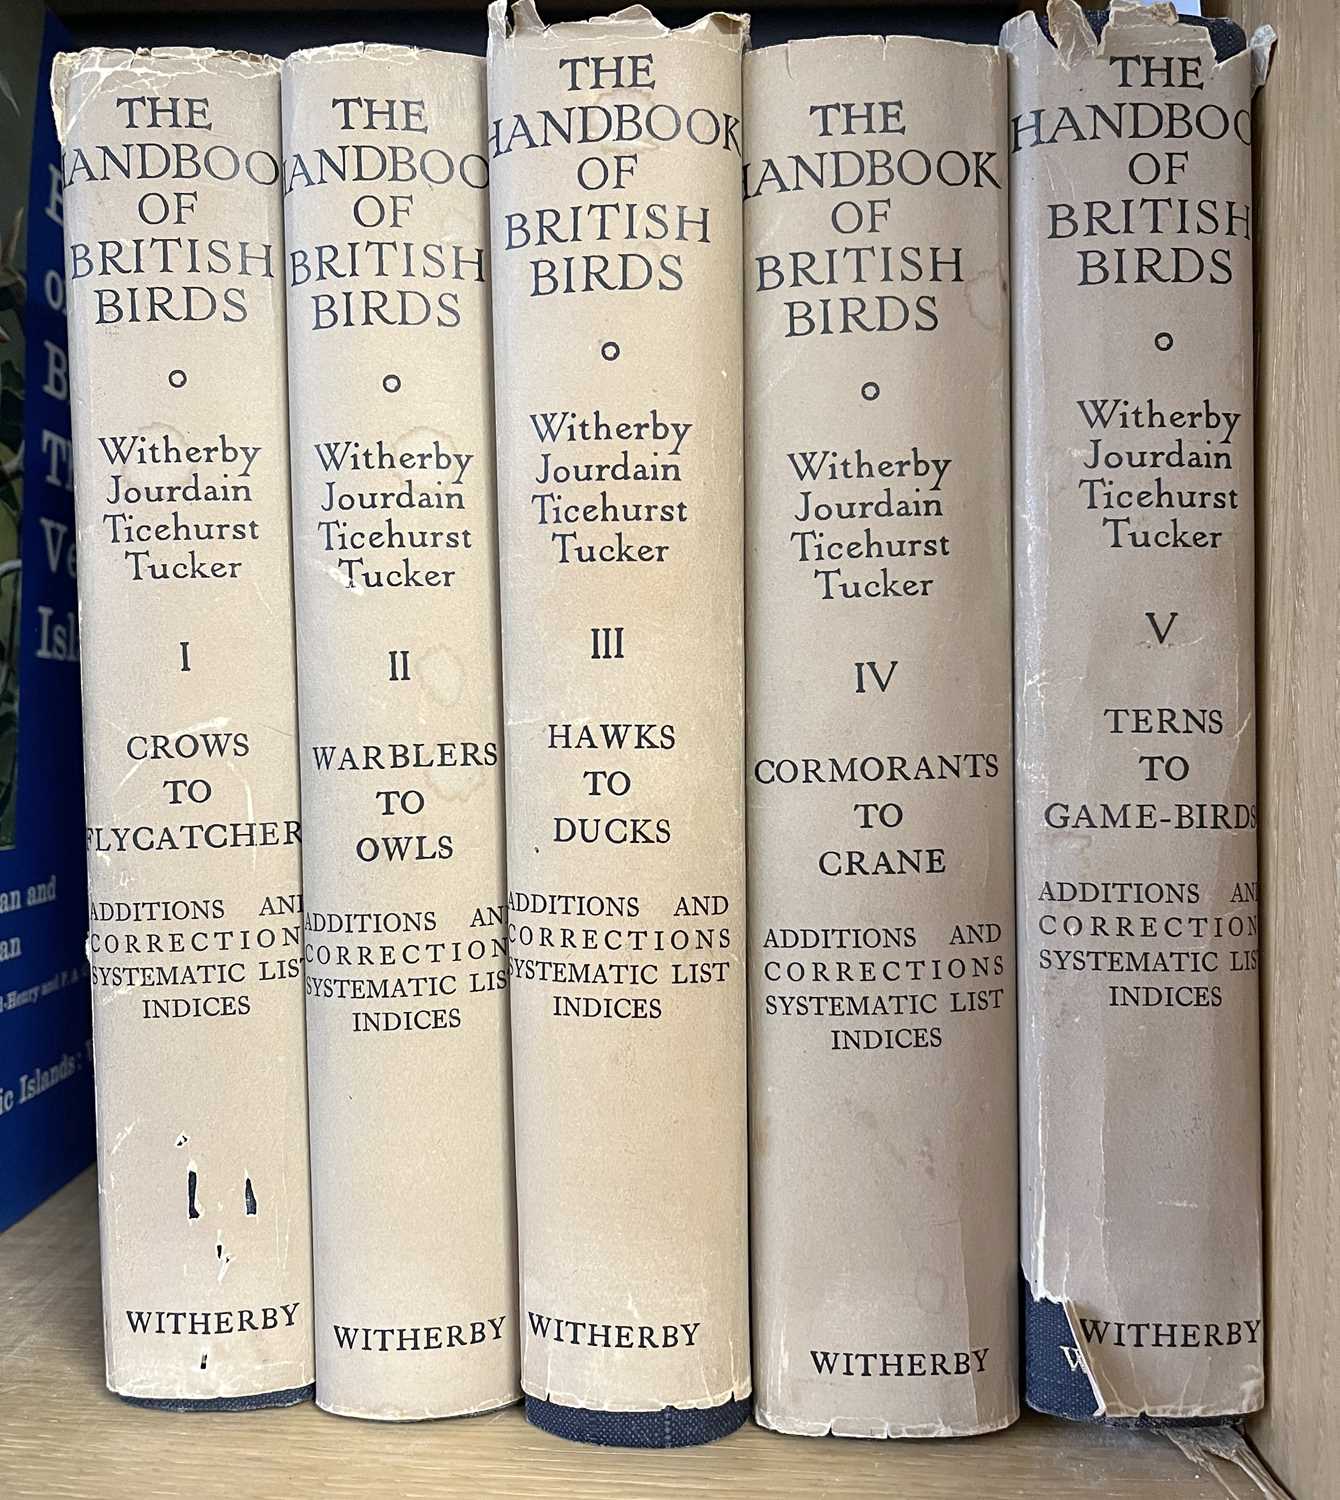 Handbook of British Birds by Witherby, published London, H F & G Witherby, Edited also by